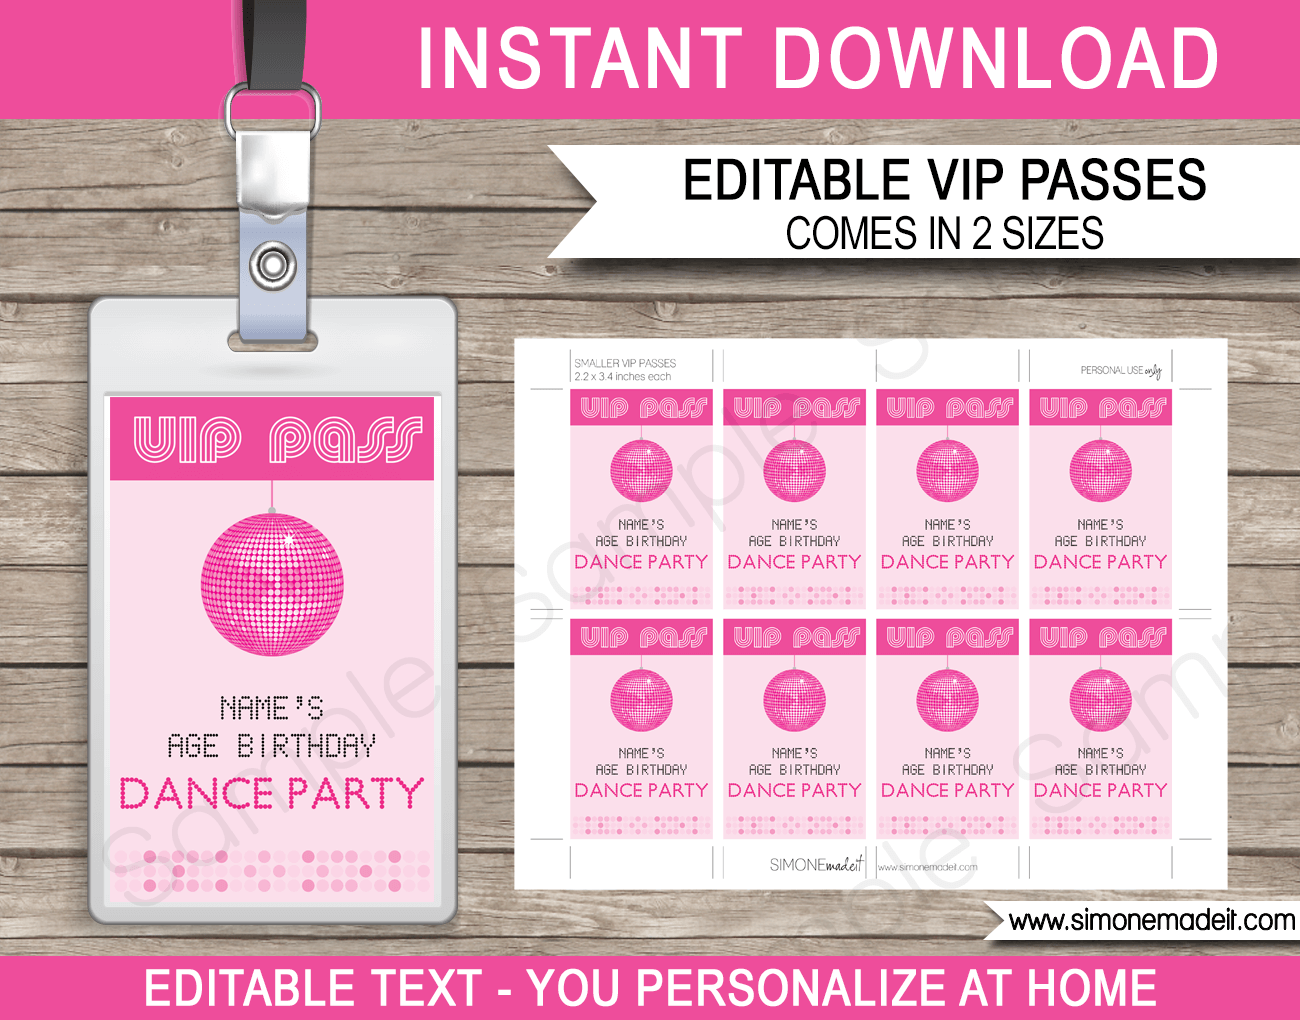 dp2-disco-party-vip-pass-digital-instant-editable-template-dance-party